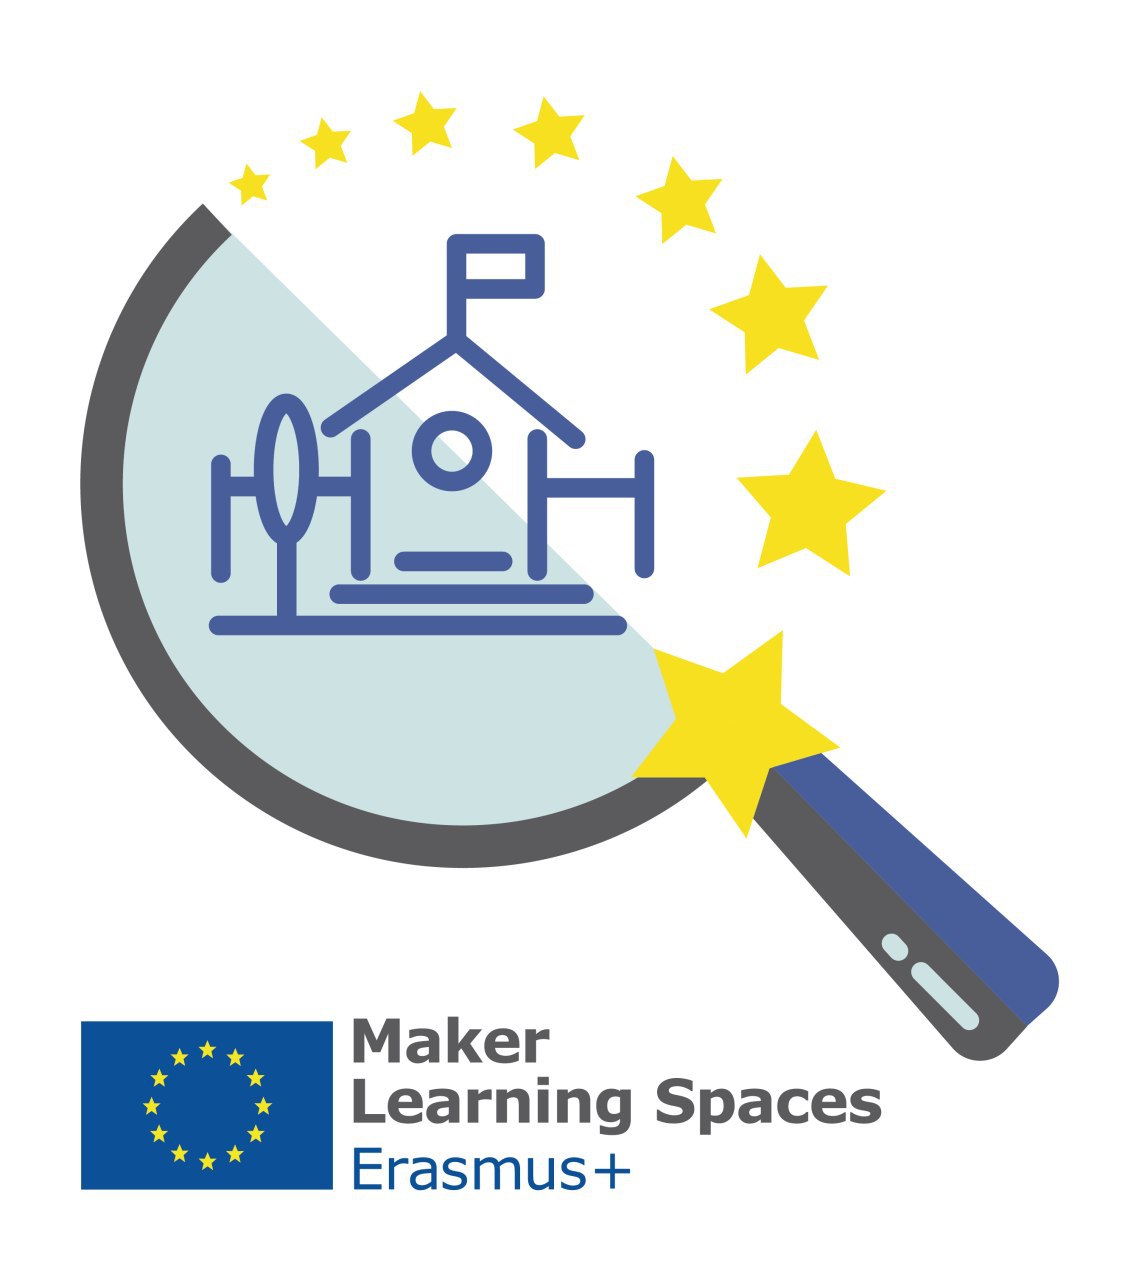 PROYECTO ERASMUS+ MAKER LEARNING SPACES